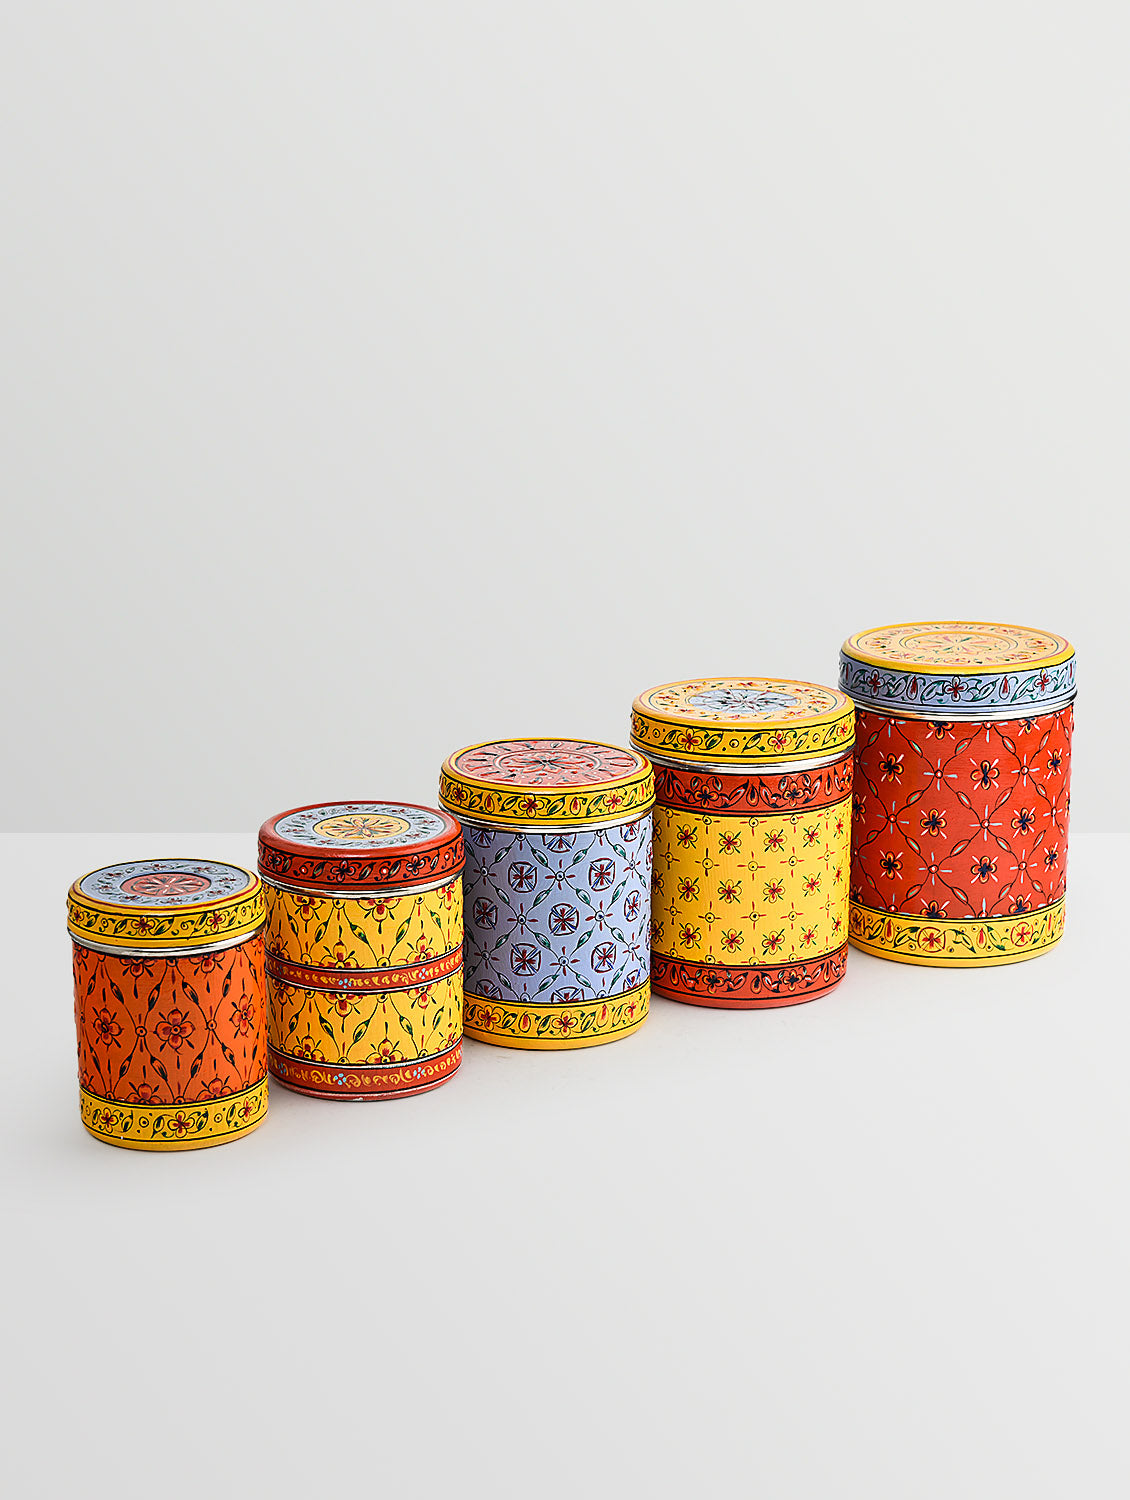 Canister set of 5 containers: Hand Painted Storage Stainless Steel Nesting Jars